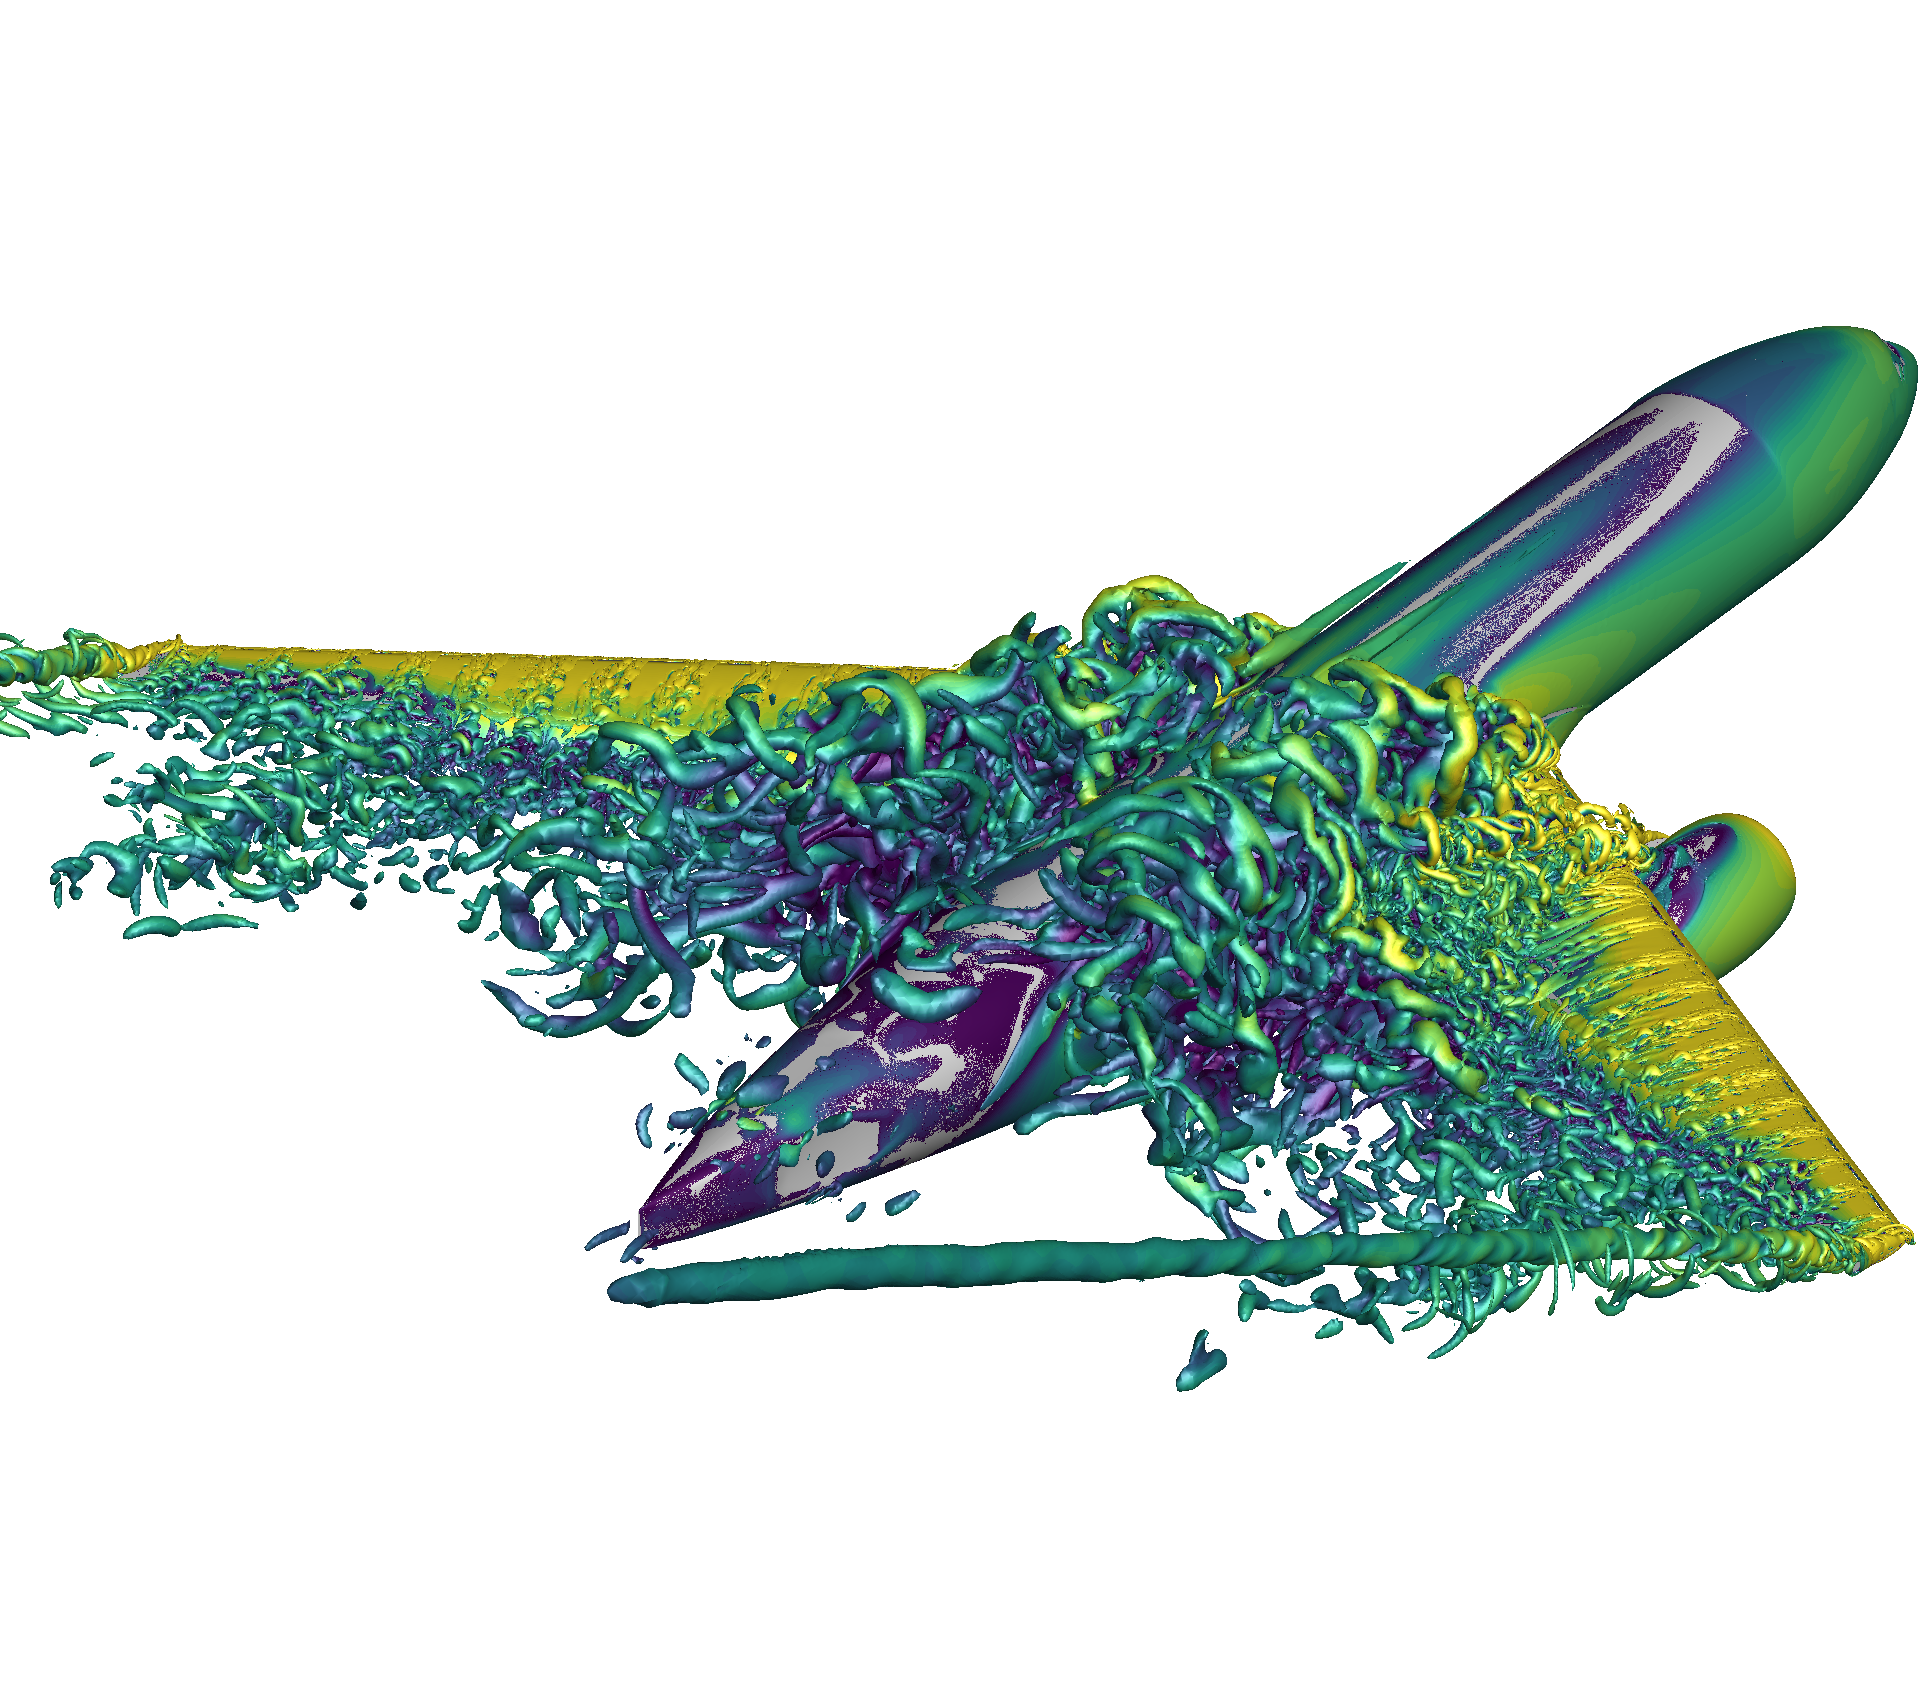 CFD Simulation Methods for High-Lift Aircraft Configurations (Part 3 of 3)